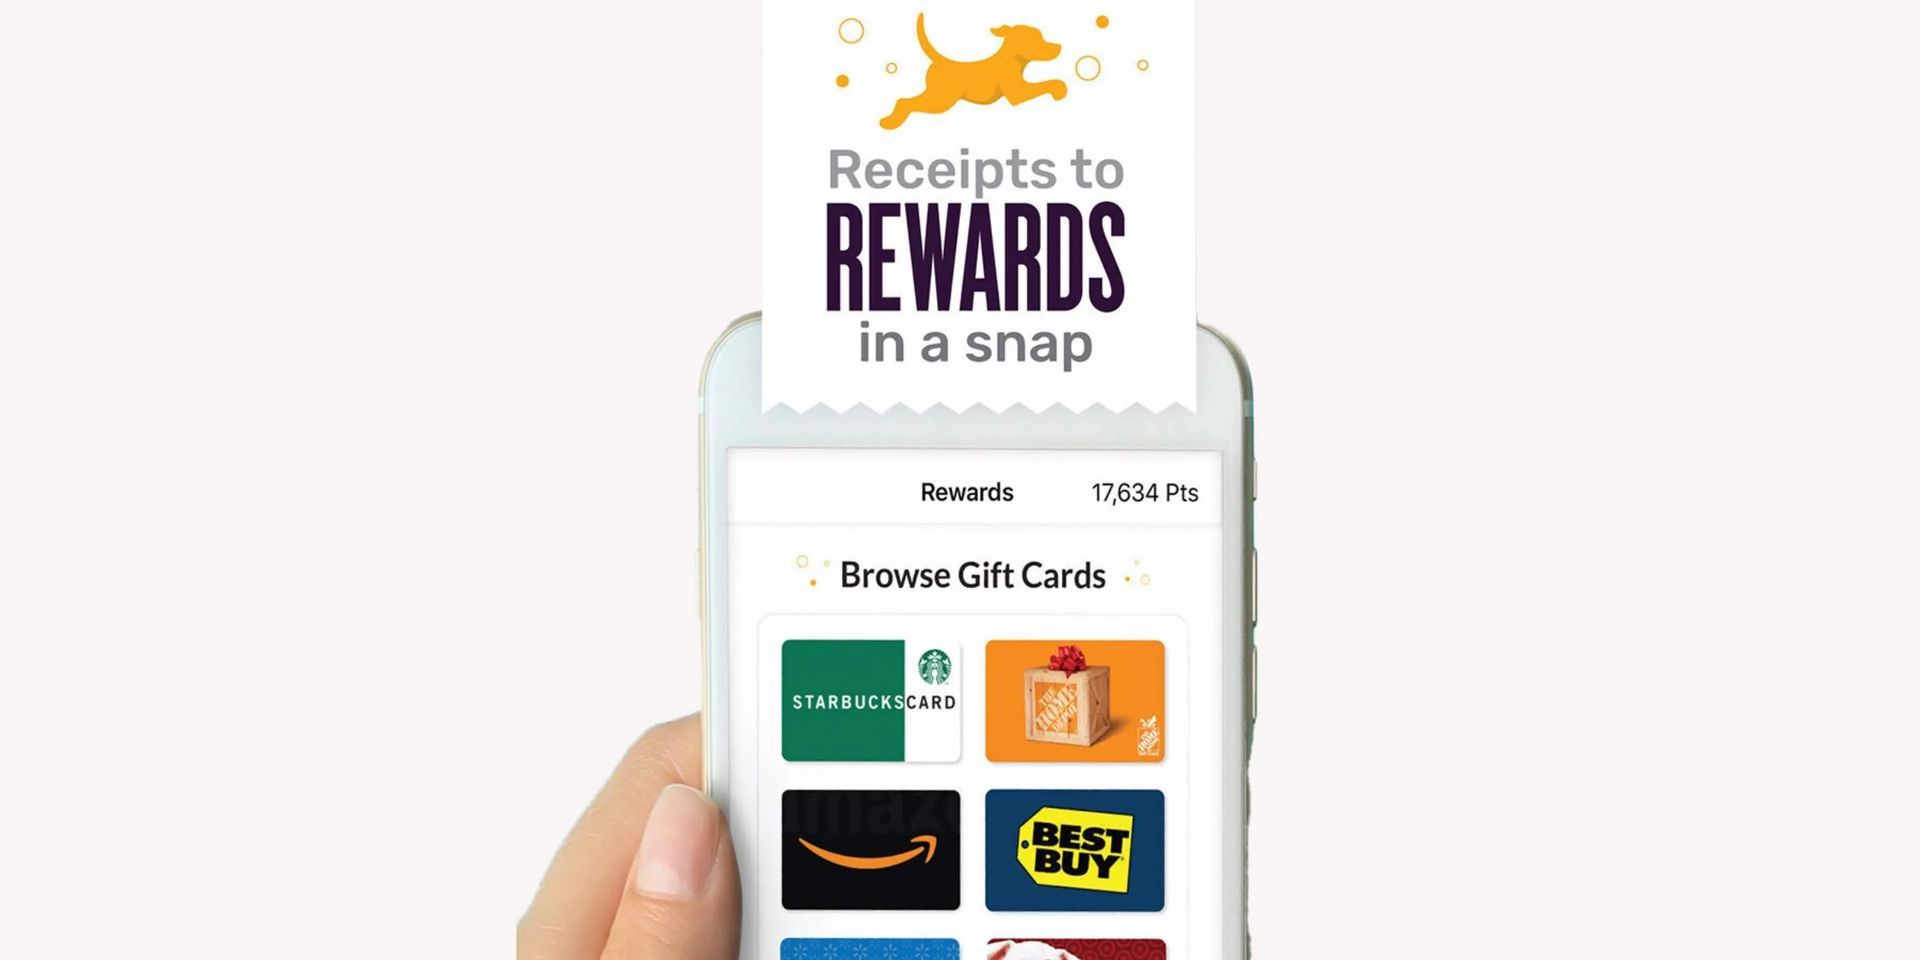 How to delete Fetch Rewards account